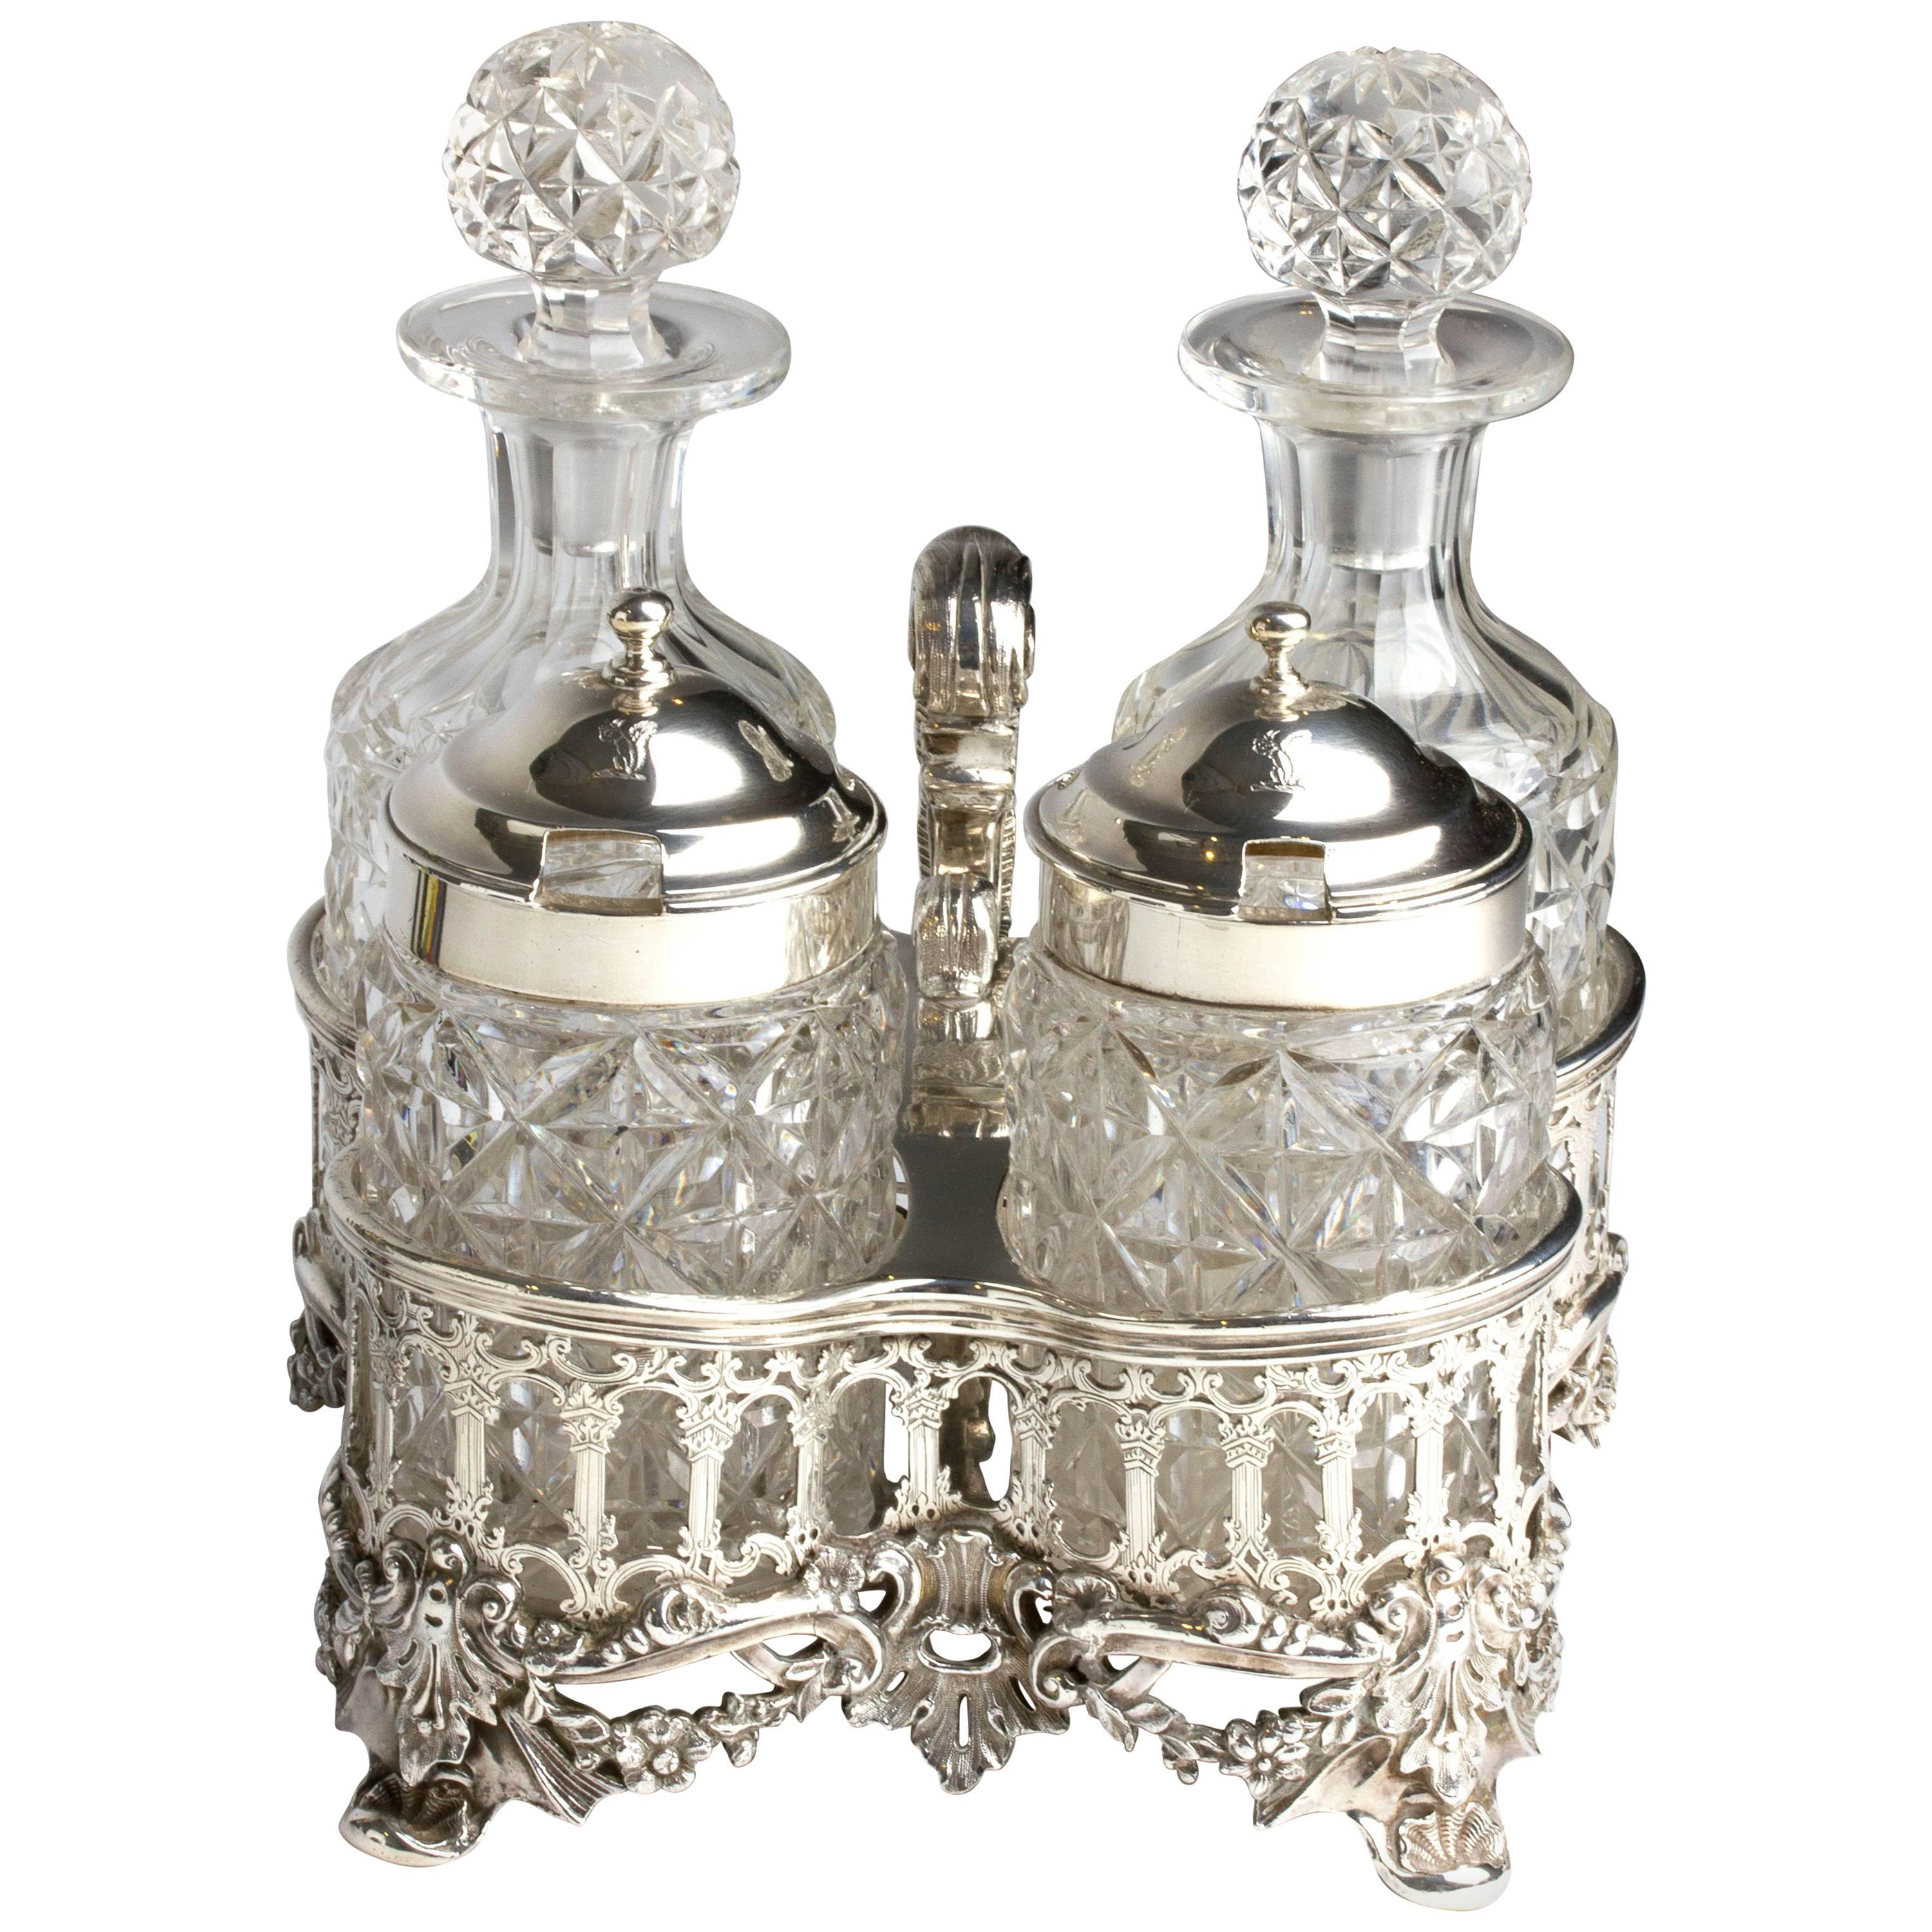 Sterling Silver and Cut Glass Table Cruet Set, R & S Garrard, 1836-1837 For Sale